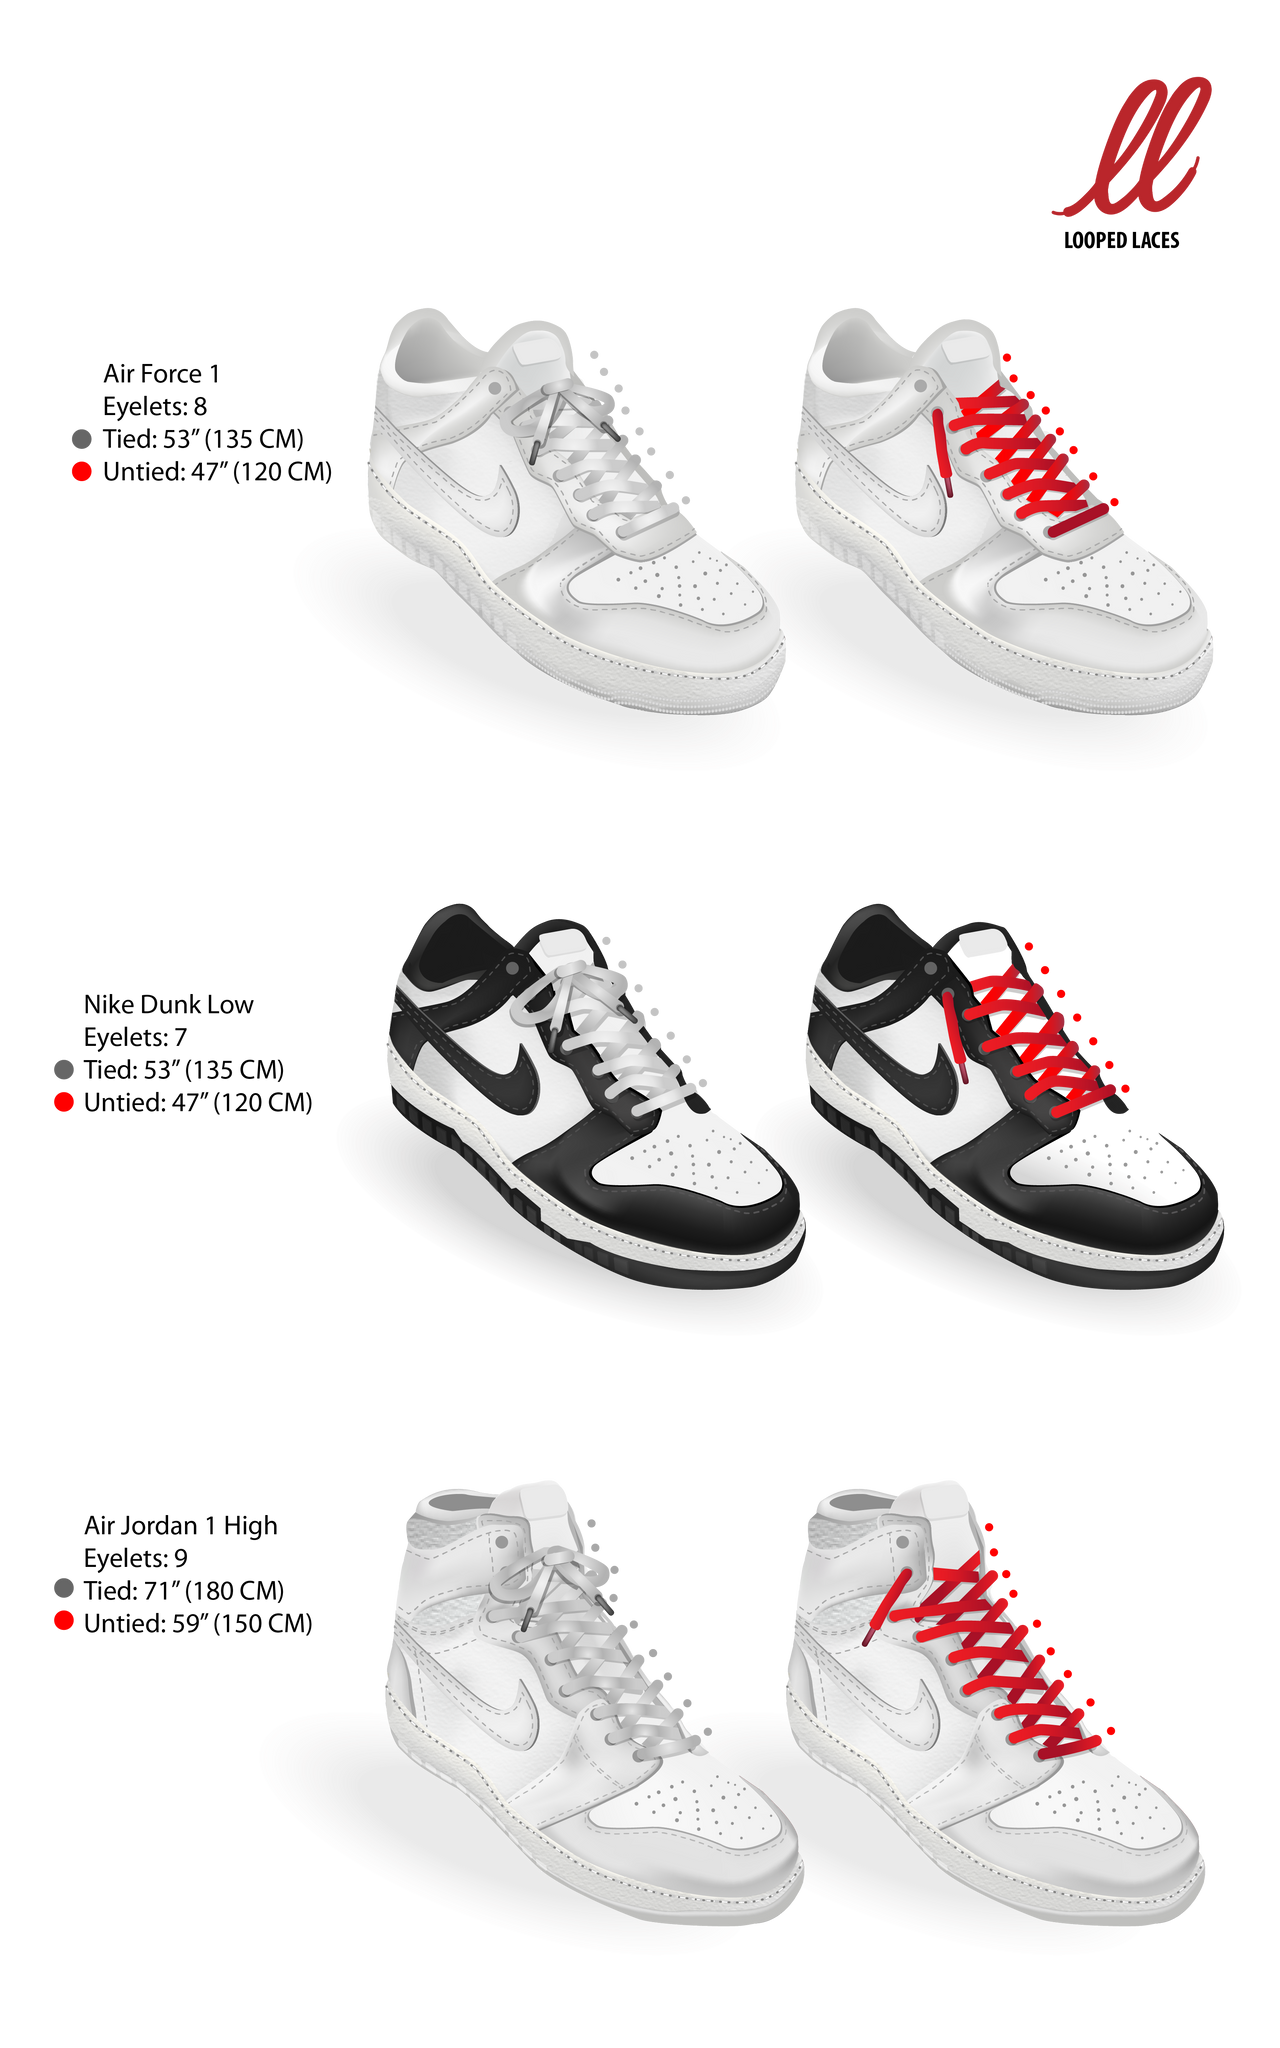 Looped Laces Sneaker Lacing Reference for Air Force 1, Nike Dunk Low and Air Jordan 1 High in untied and loose-laced styles